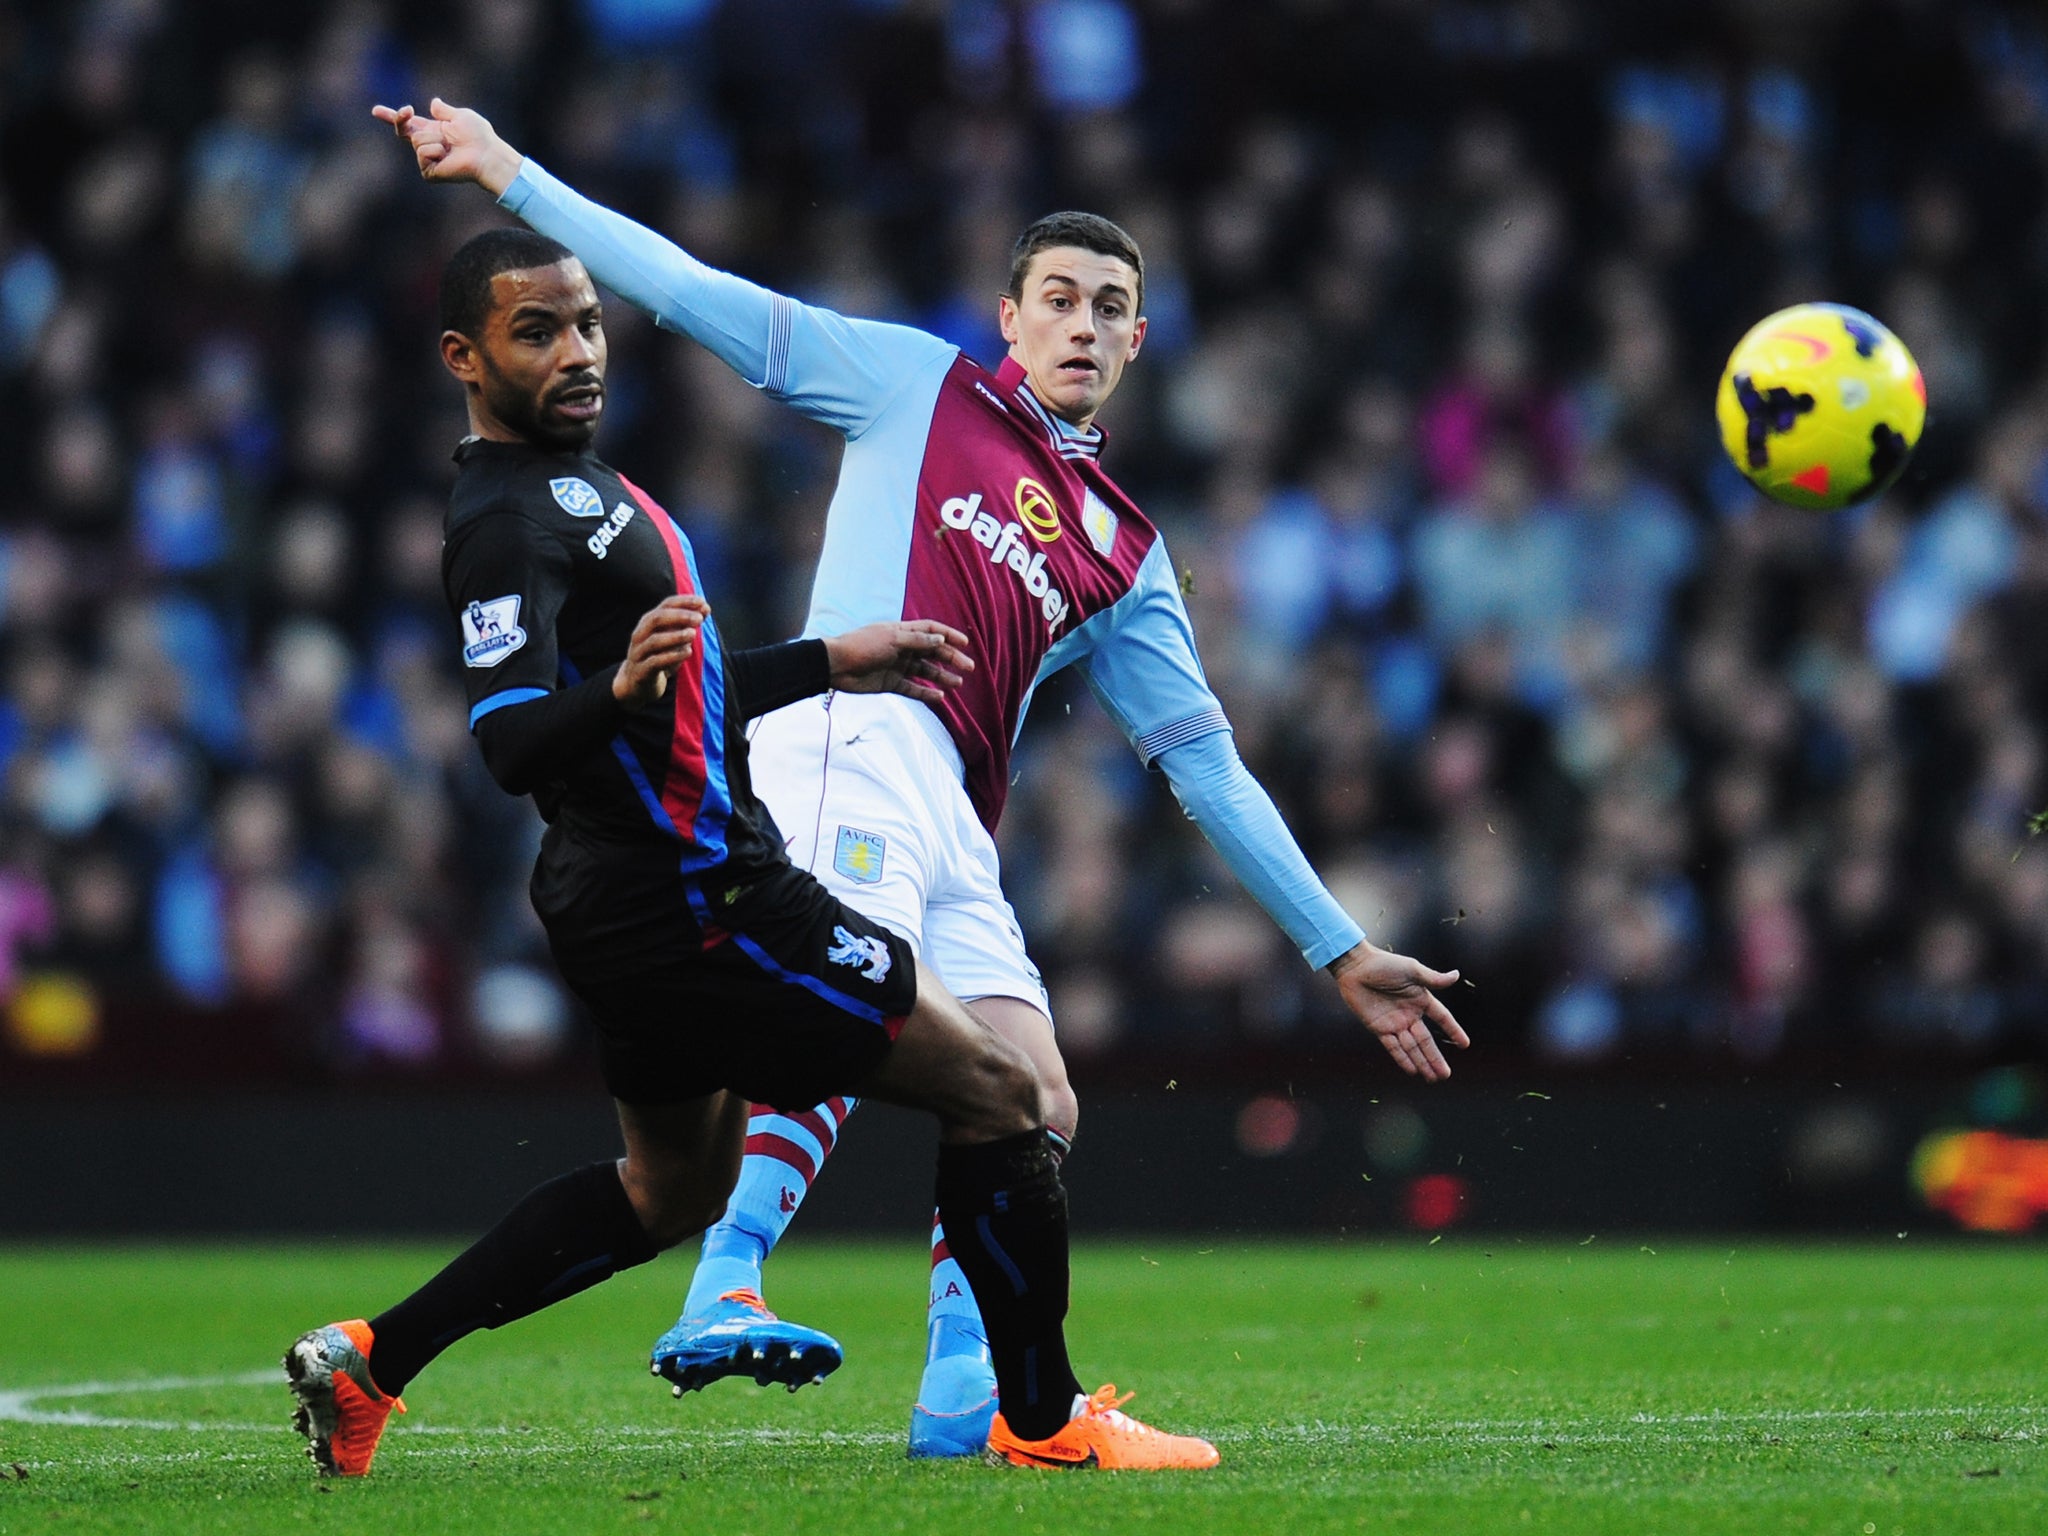 Jason Puncheon (L) and Matthew Lowton (R) compete for the ball during the match between Aston Villa and Crystal Palace